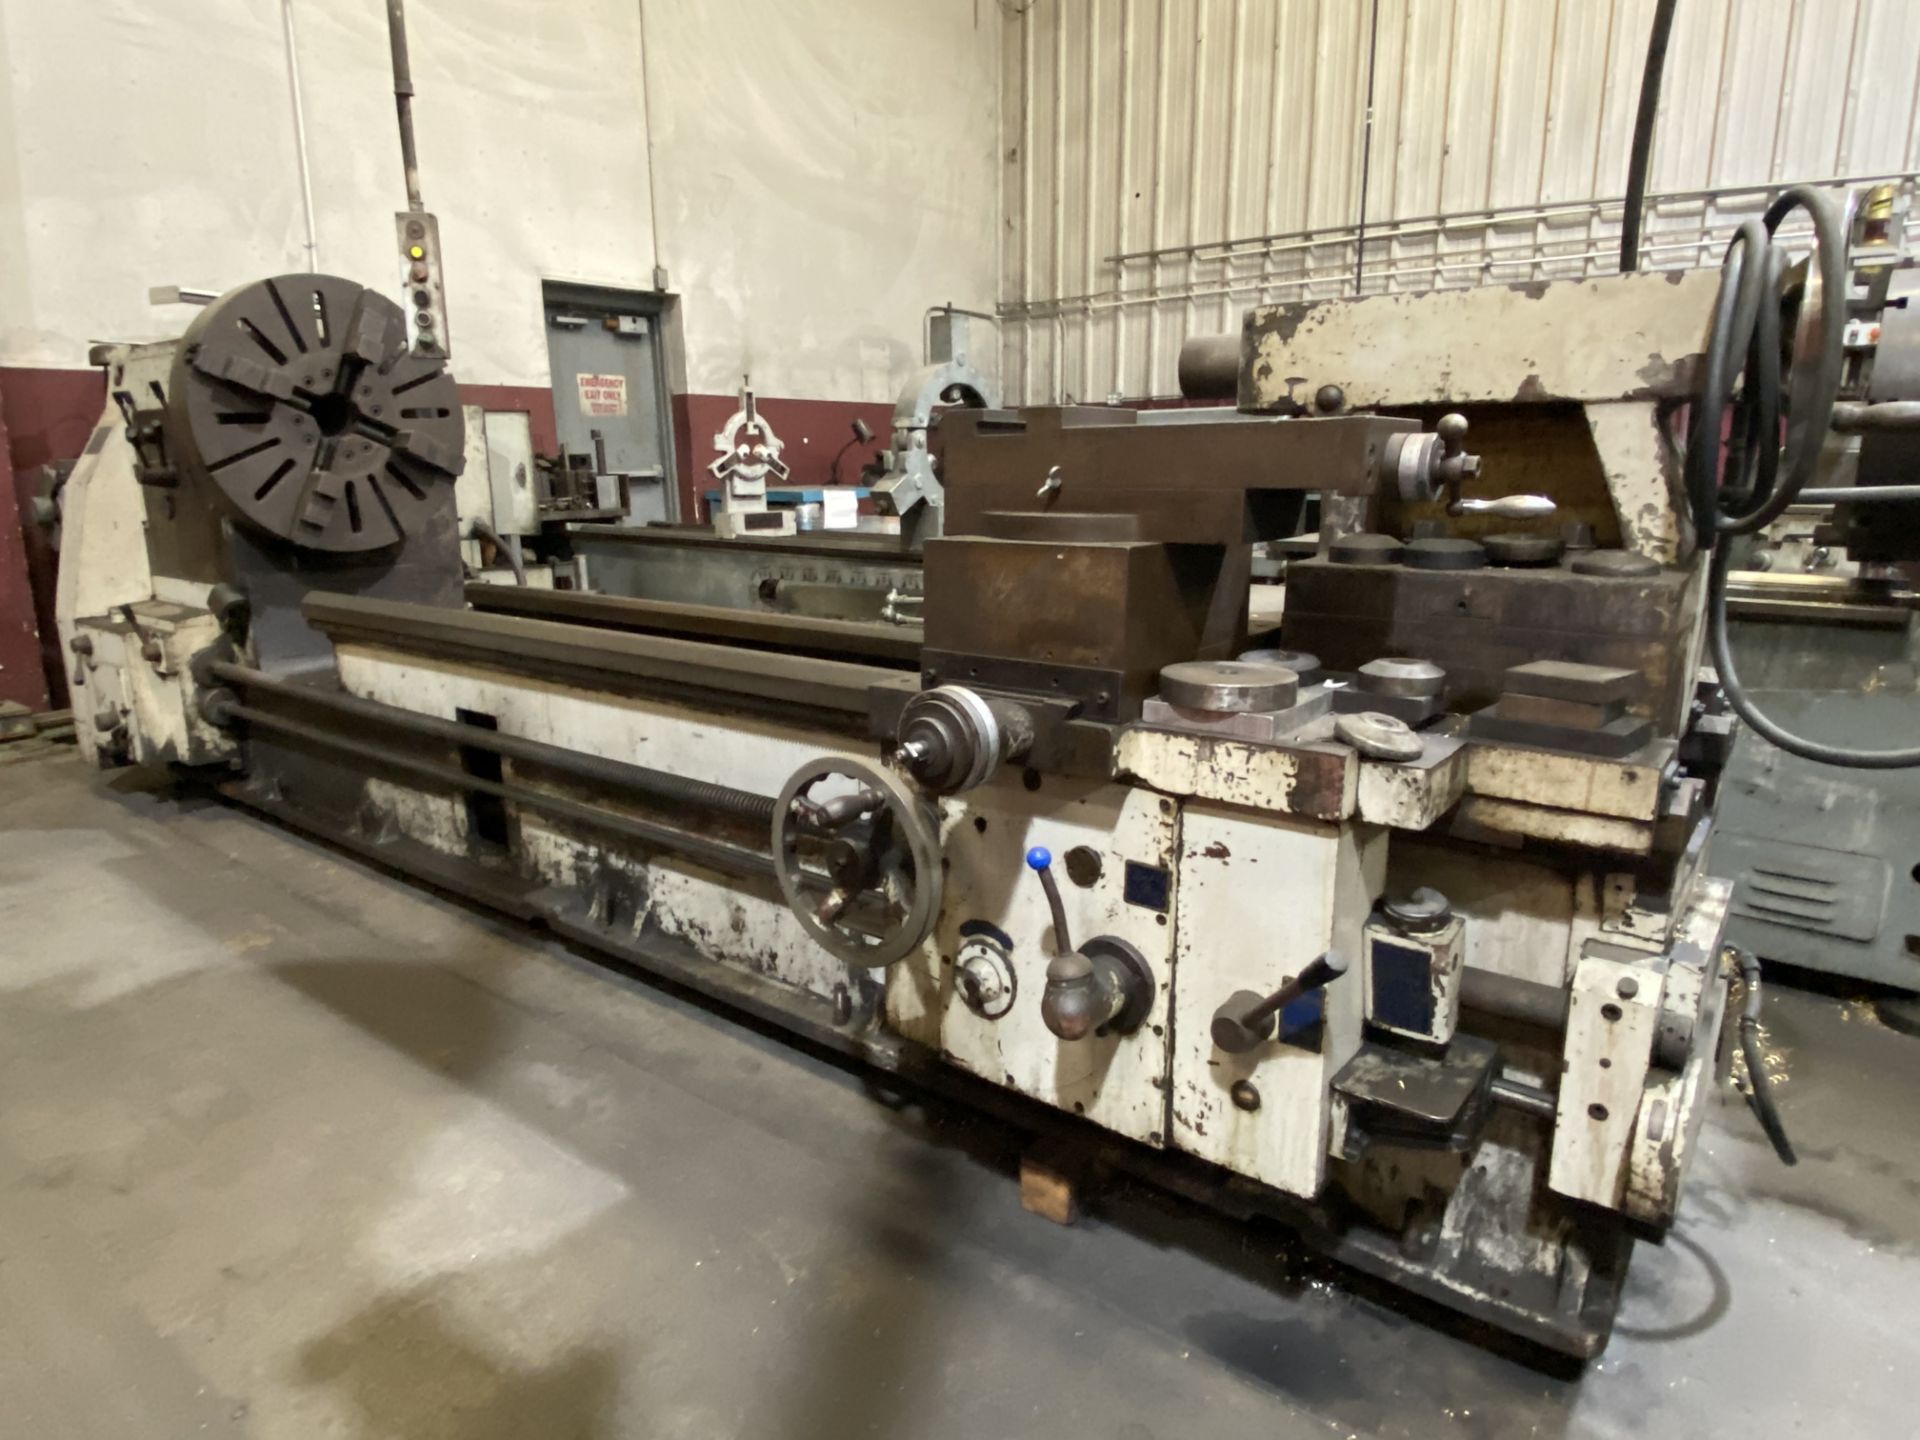 CADILLAC GAP BED ENGINE LATHE, MODEL 32120, 32" X 120", 42" SWING IN GAP, TAILSTOCK, S/N 267014